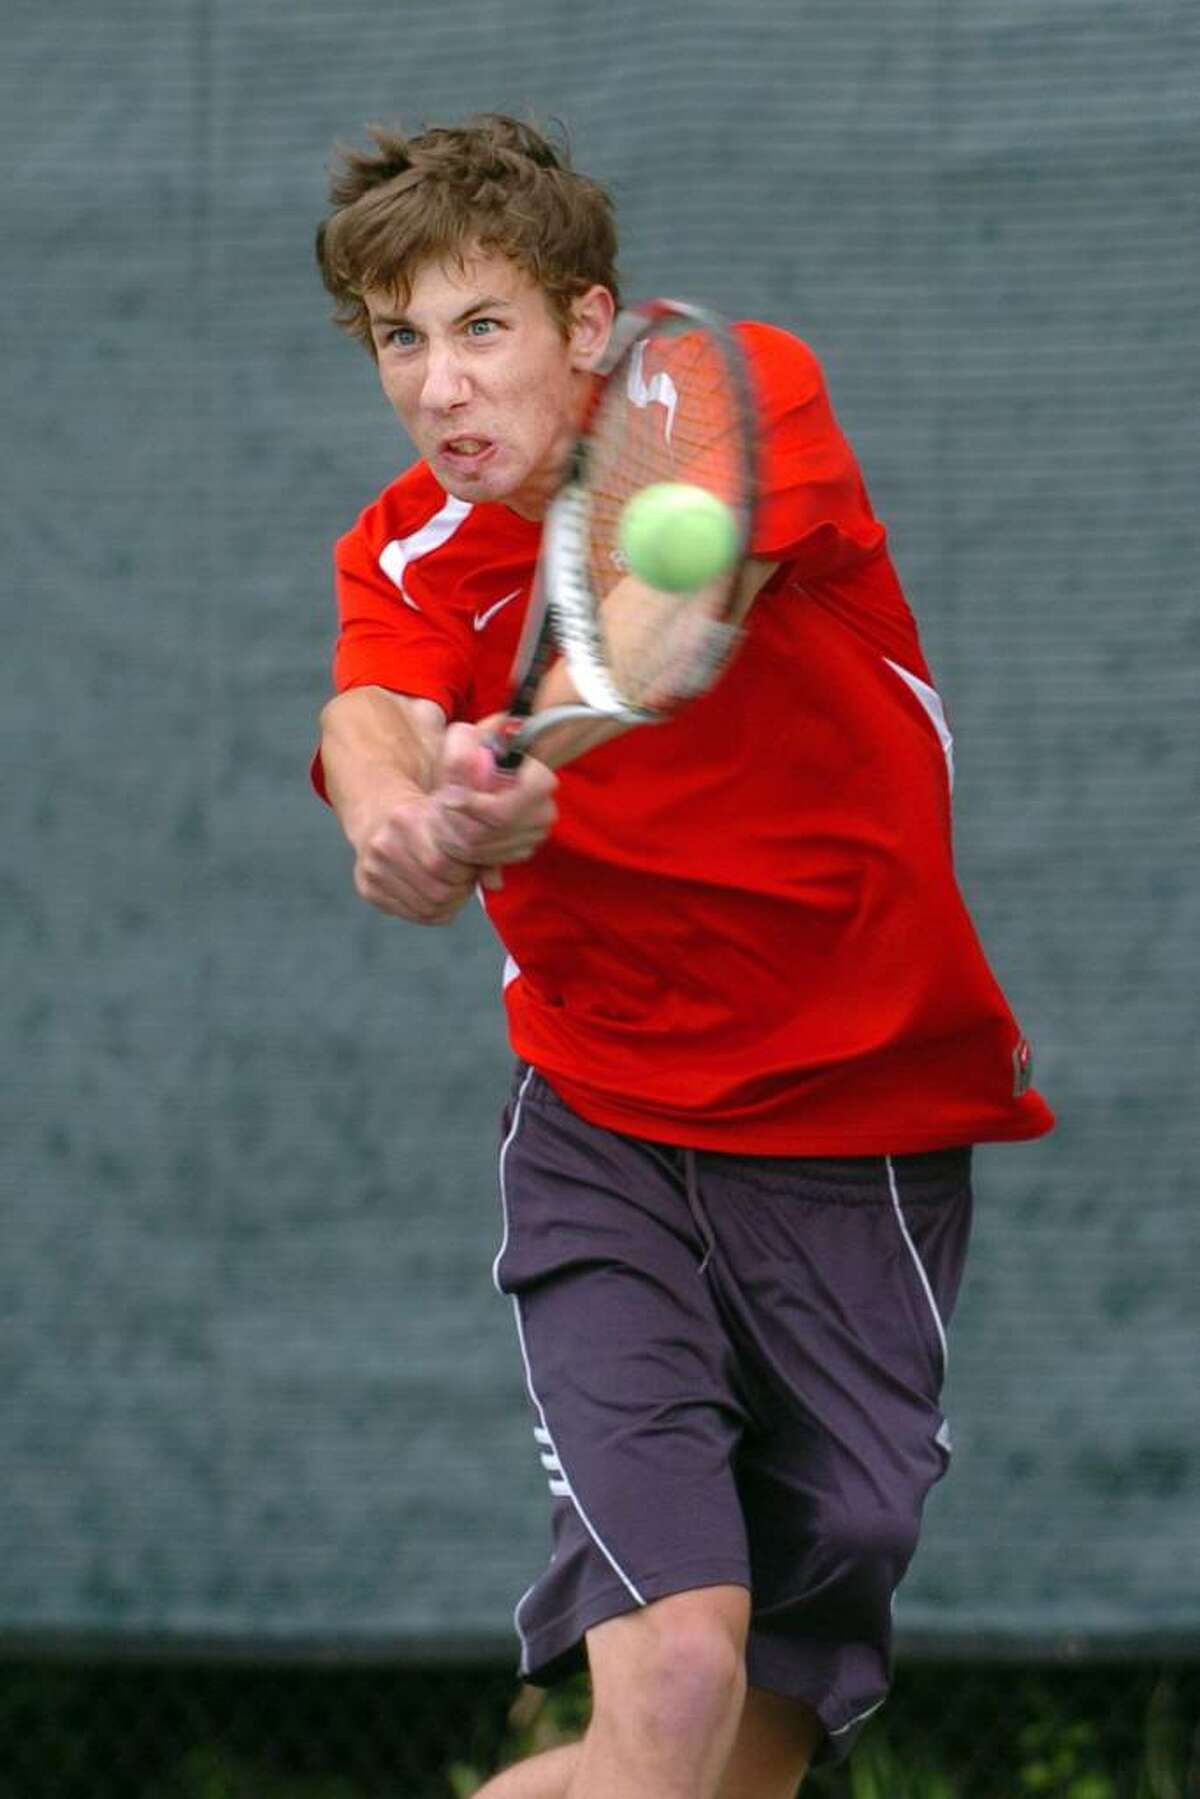 New Canaan's Kevin Budrawich returns the ball to Staples' Cam Marco during their match Tuesday May 11, 2010 in Westport.